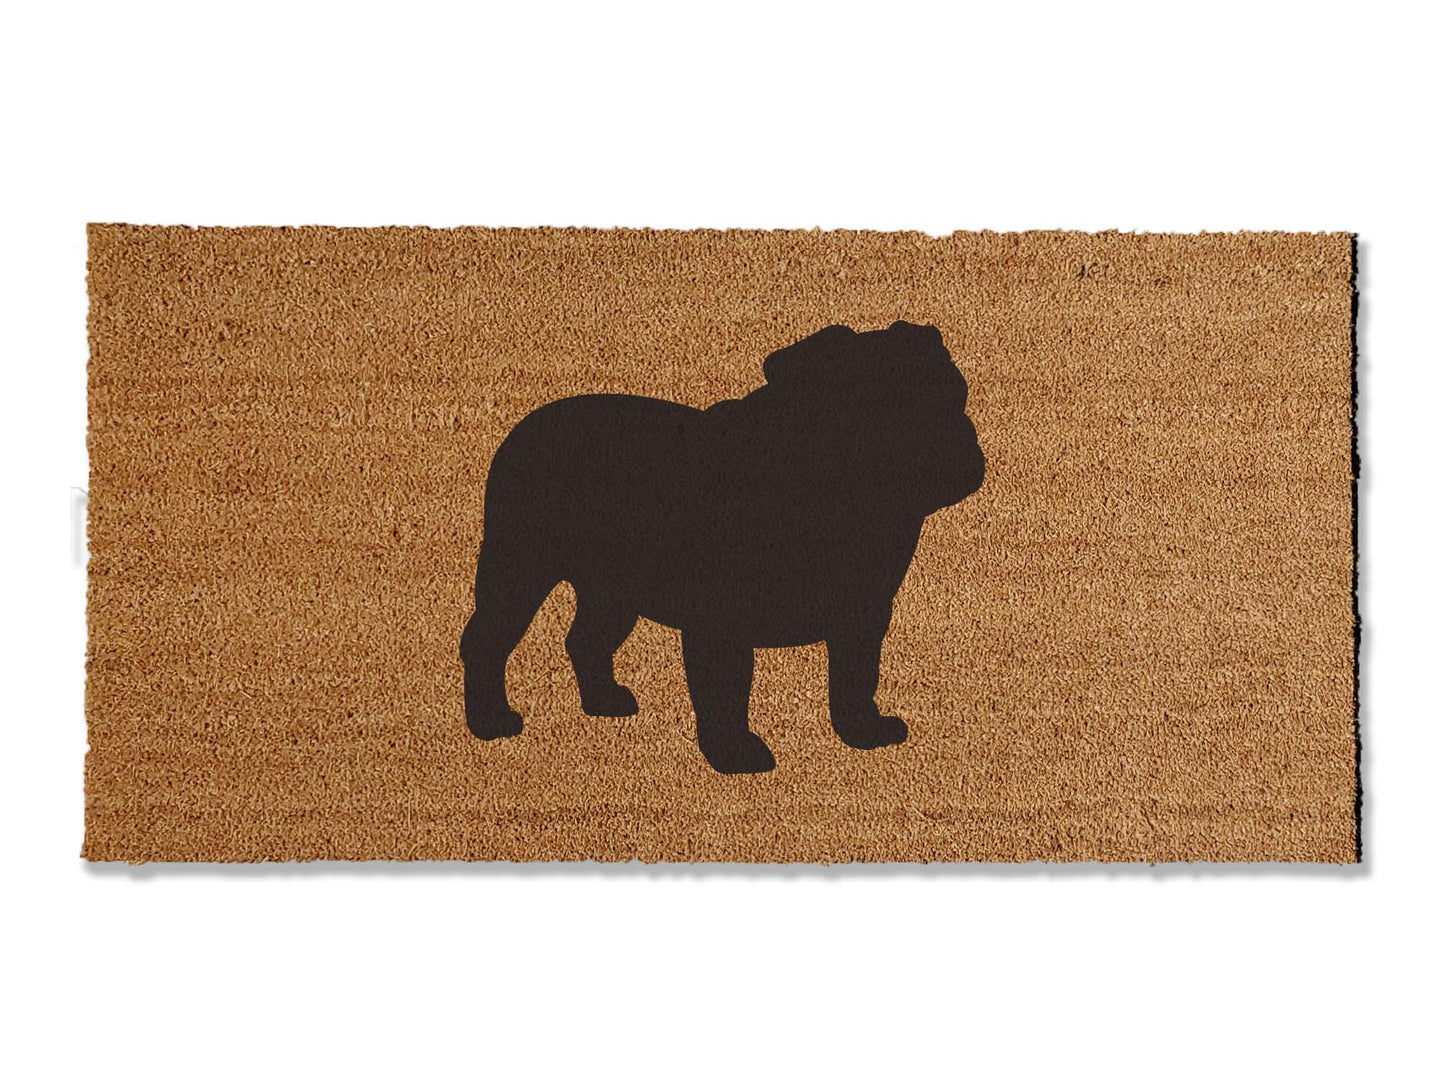 Elevate your entryway with our charming coir welcome doormat featuring an adorable English Bulldog design. Available in multiple sizes, it's the perfect gift for dog lovers, adding a delightful touch to your home's first impression.